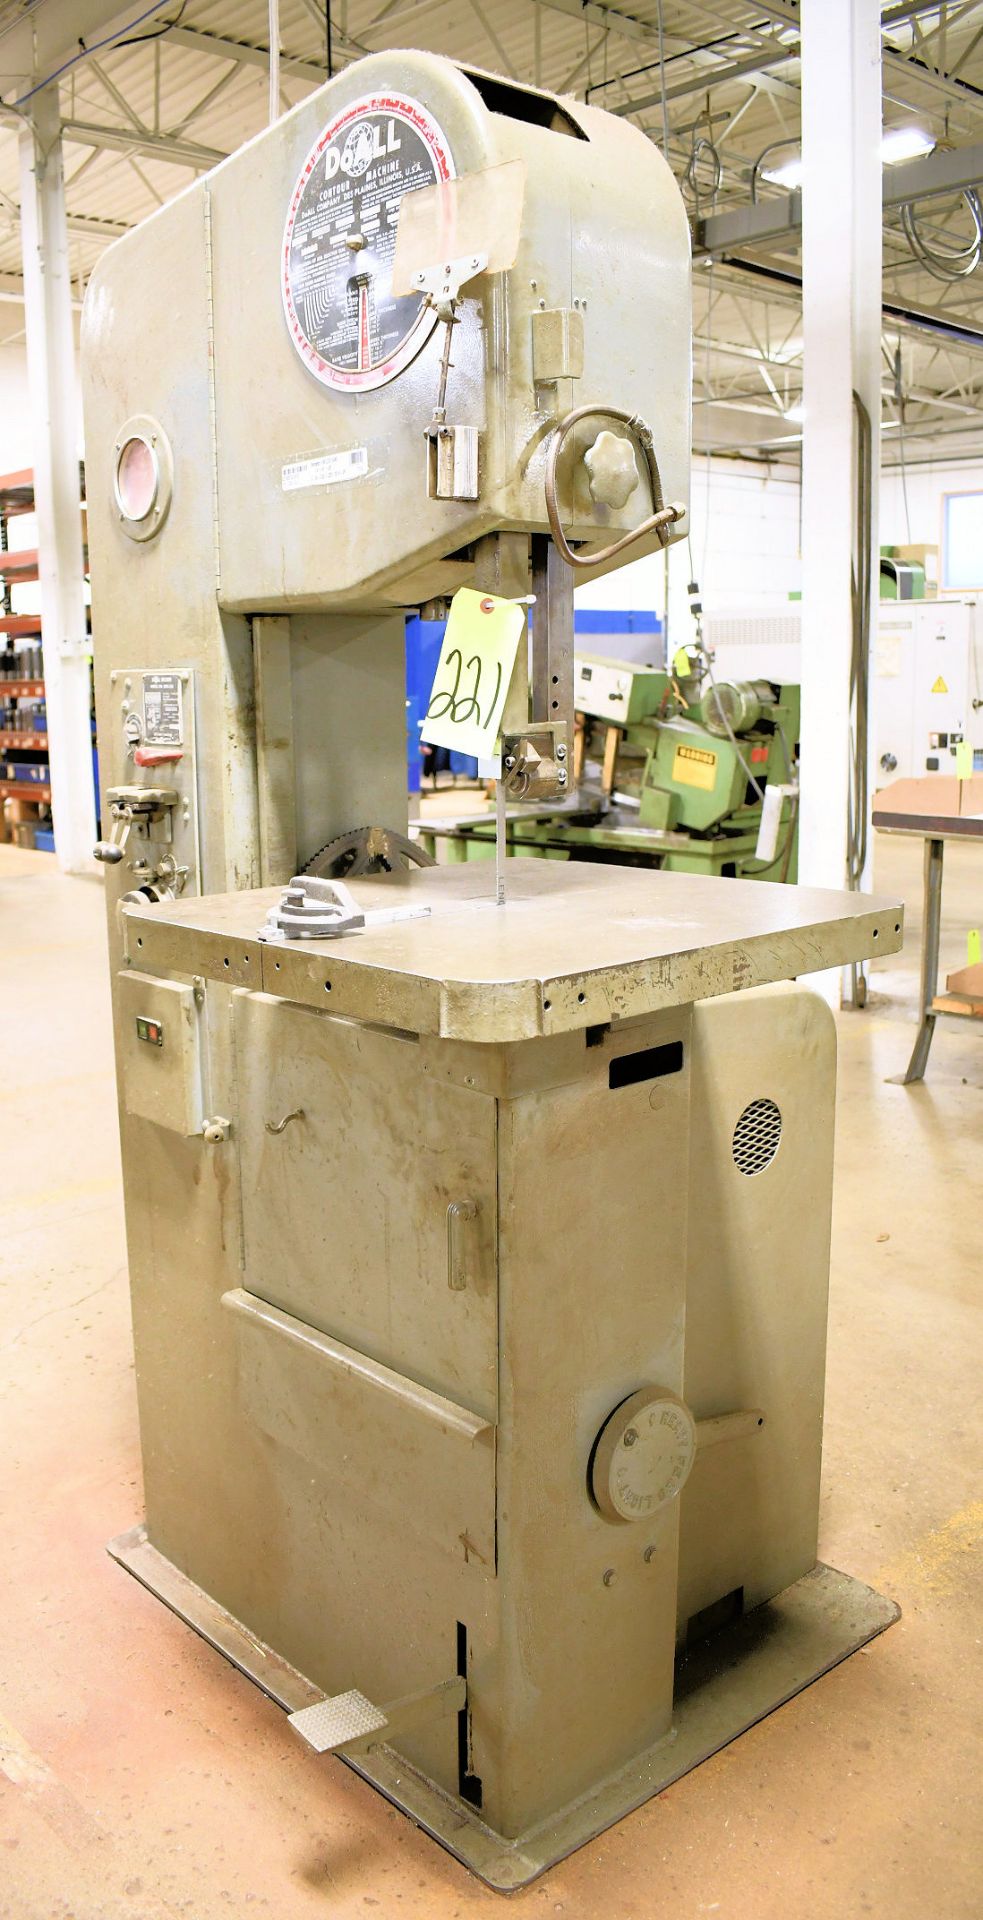 DoAll Model 1612-0, 16" Vertical Contour Metal Cutting Band Saw, S/n 209-64512,